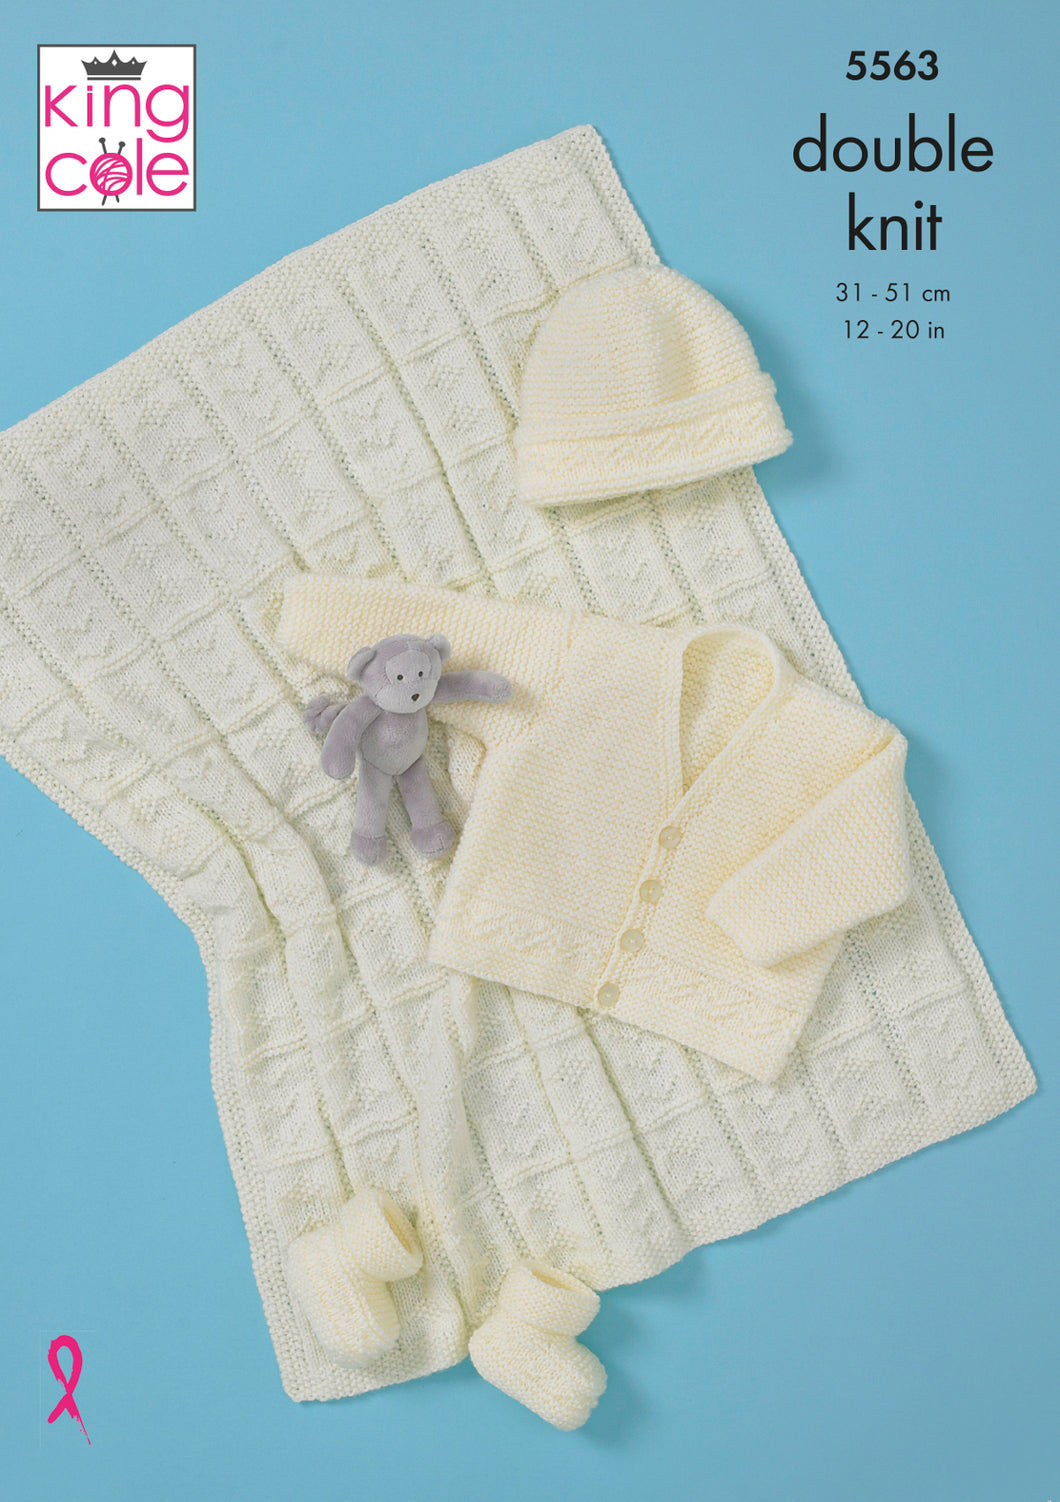 King Cole Double Knitting Pattern - Baby Cardigan Hat Bootees & Blanket (5563)